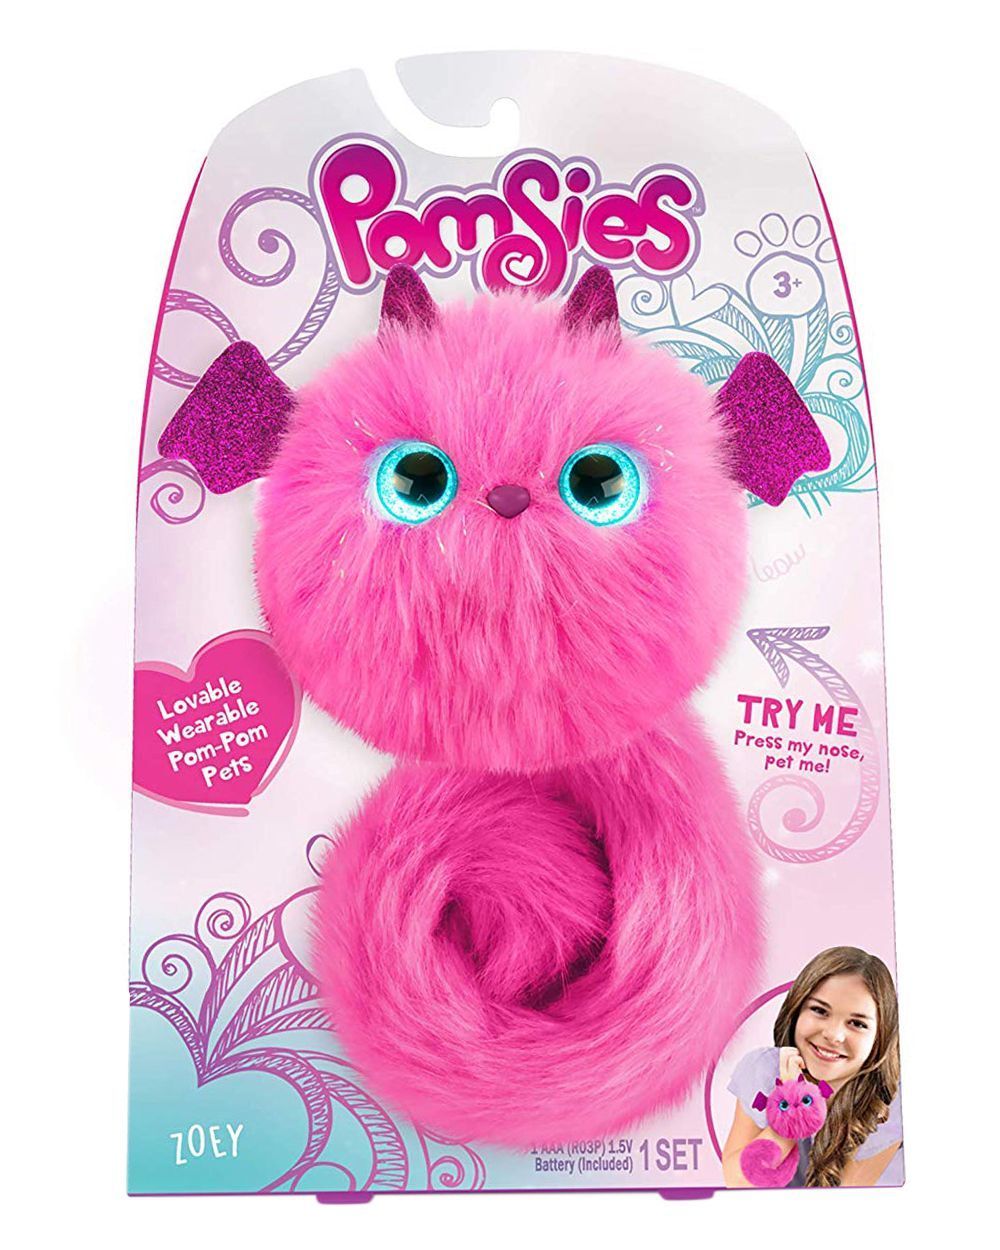 New In Box Pomsies Pet Luna Plush Interactive Toy 